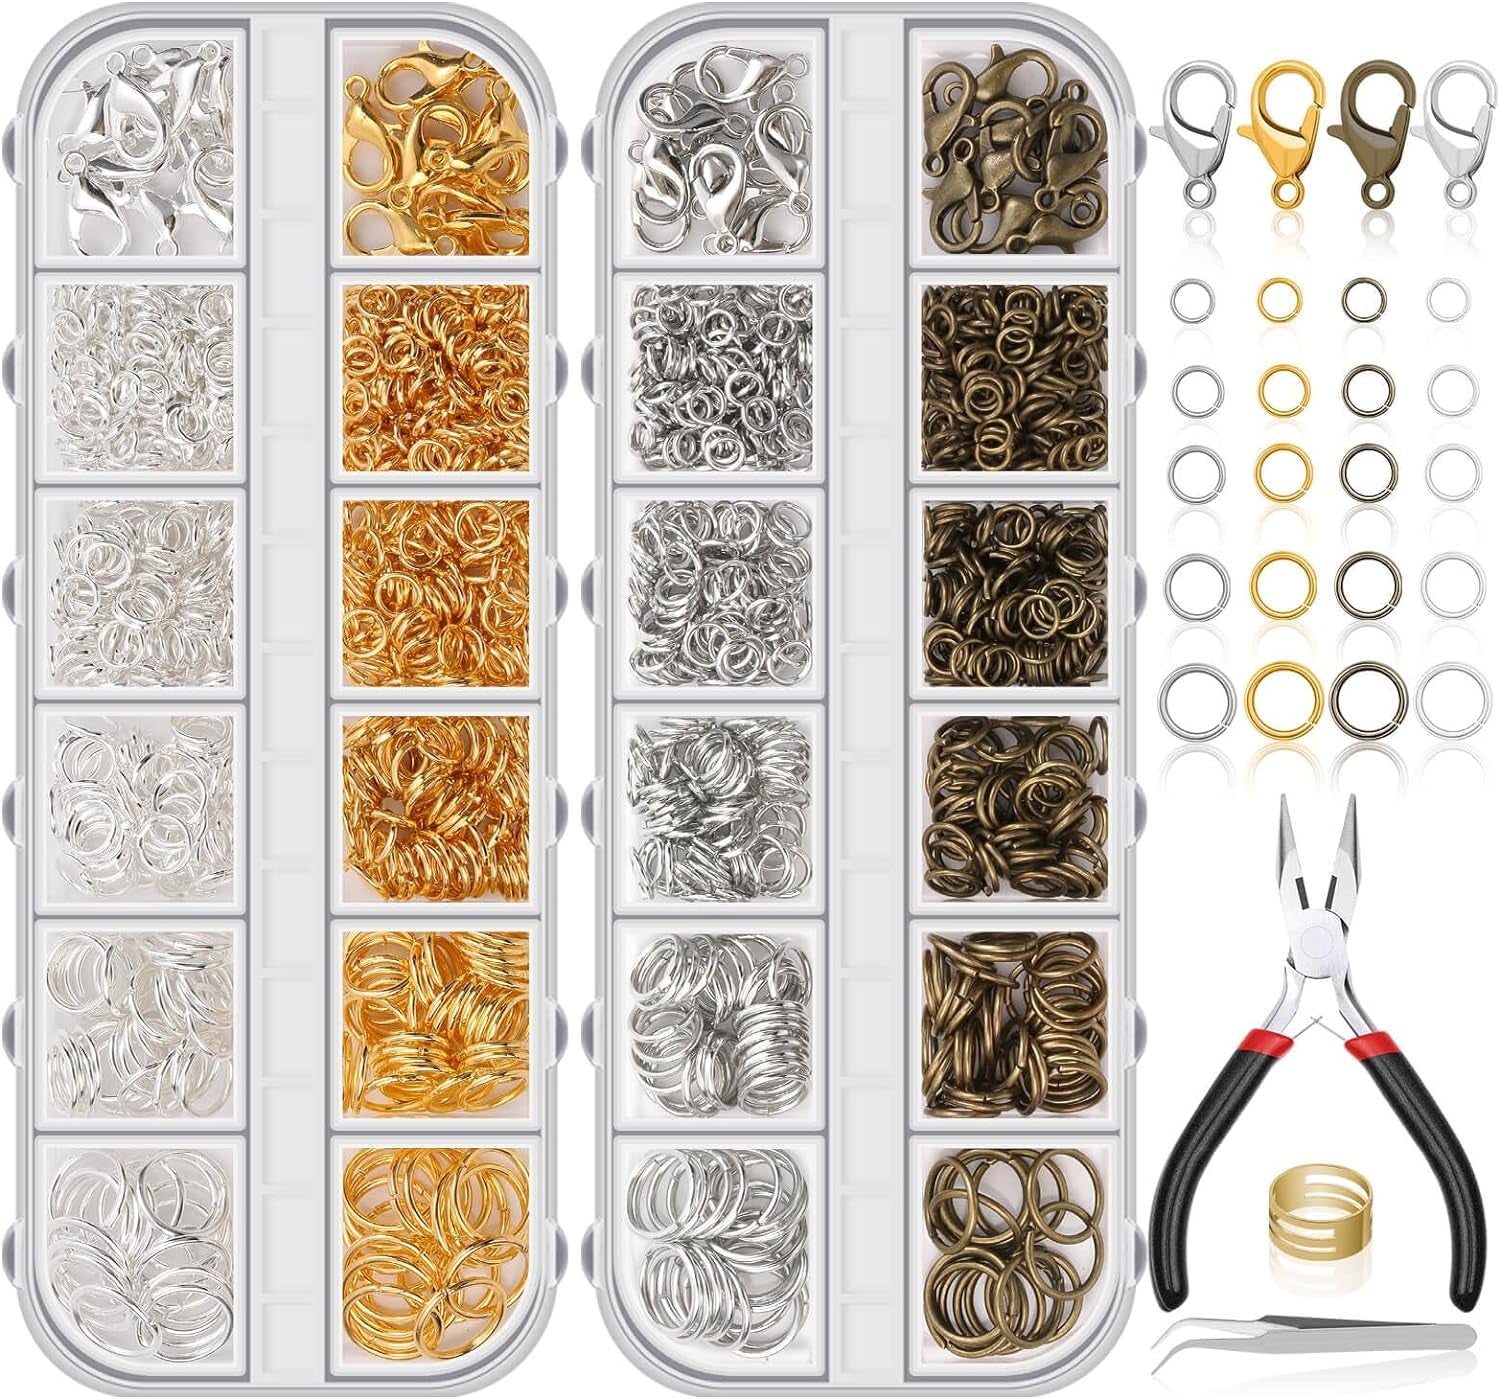 1200Pcs Open Jump Rings and Lobster Clasps Jewelry Findings Kit with Pliers for Jewelry Making (Silver and Gold)